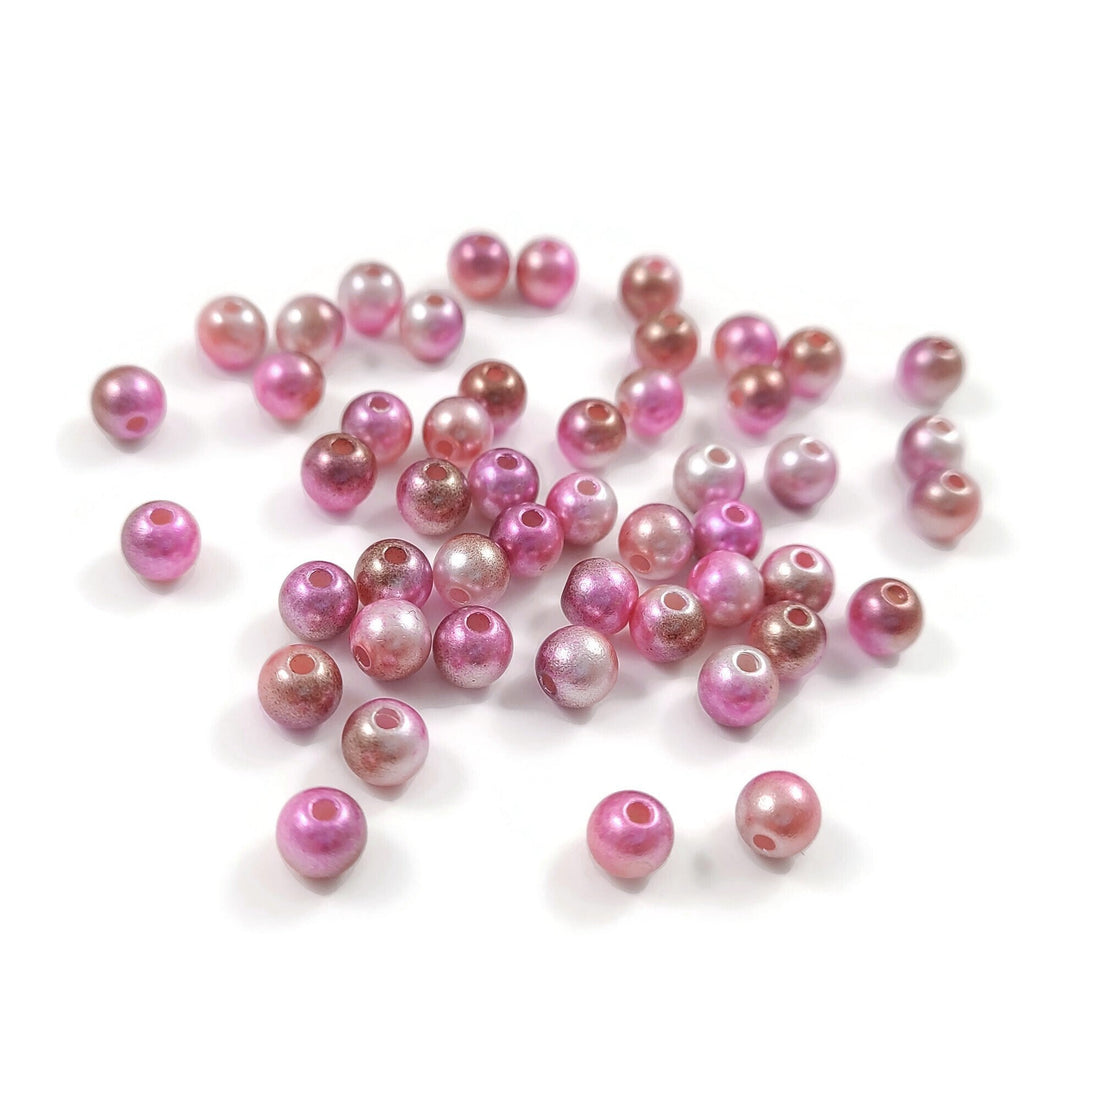 50 Pink pearly gradient beads, Assorted 6mm plastic beads for jewelry making